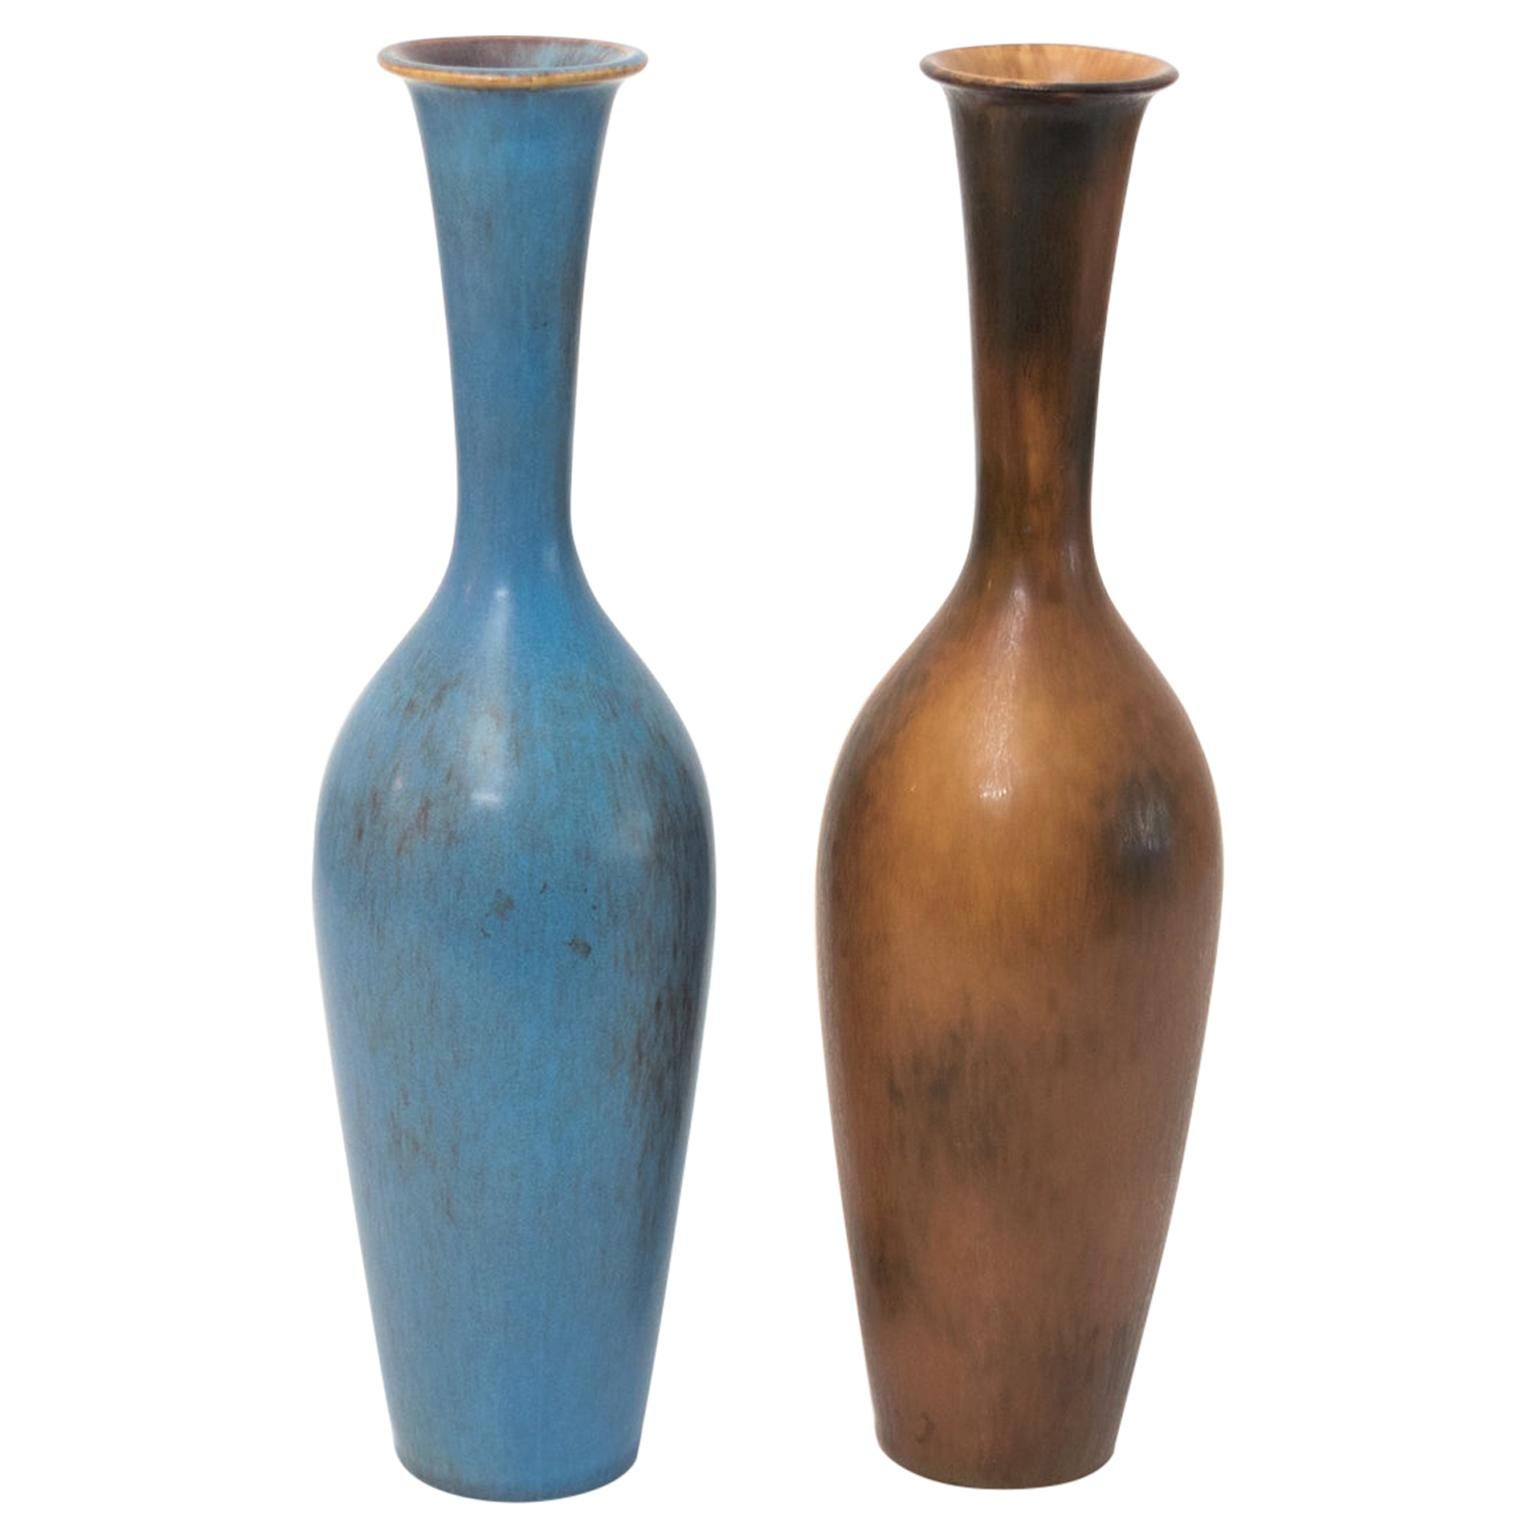 Gunnar Nylund, Rorstrand Scandinavian Modern Vases in Blue and Amber Glazes For Sale